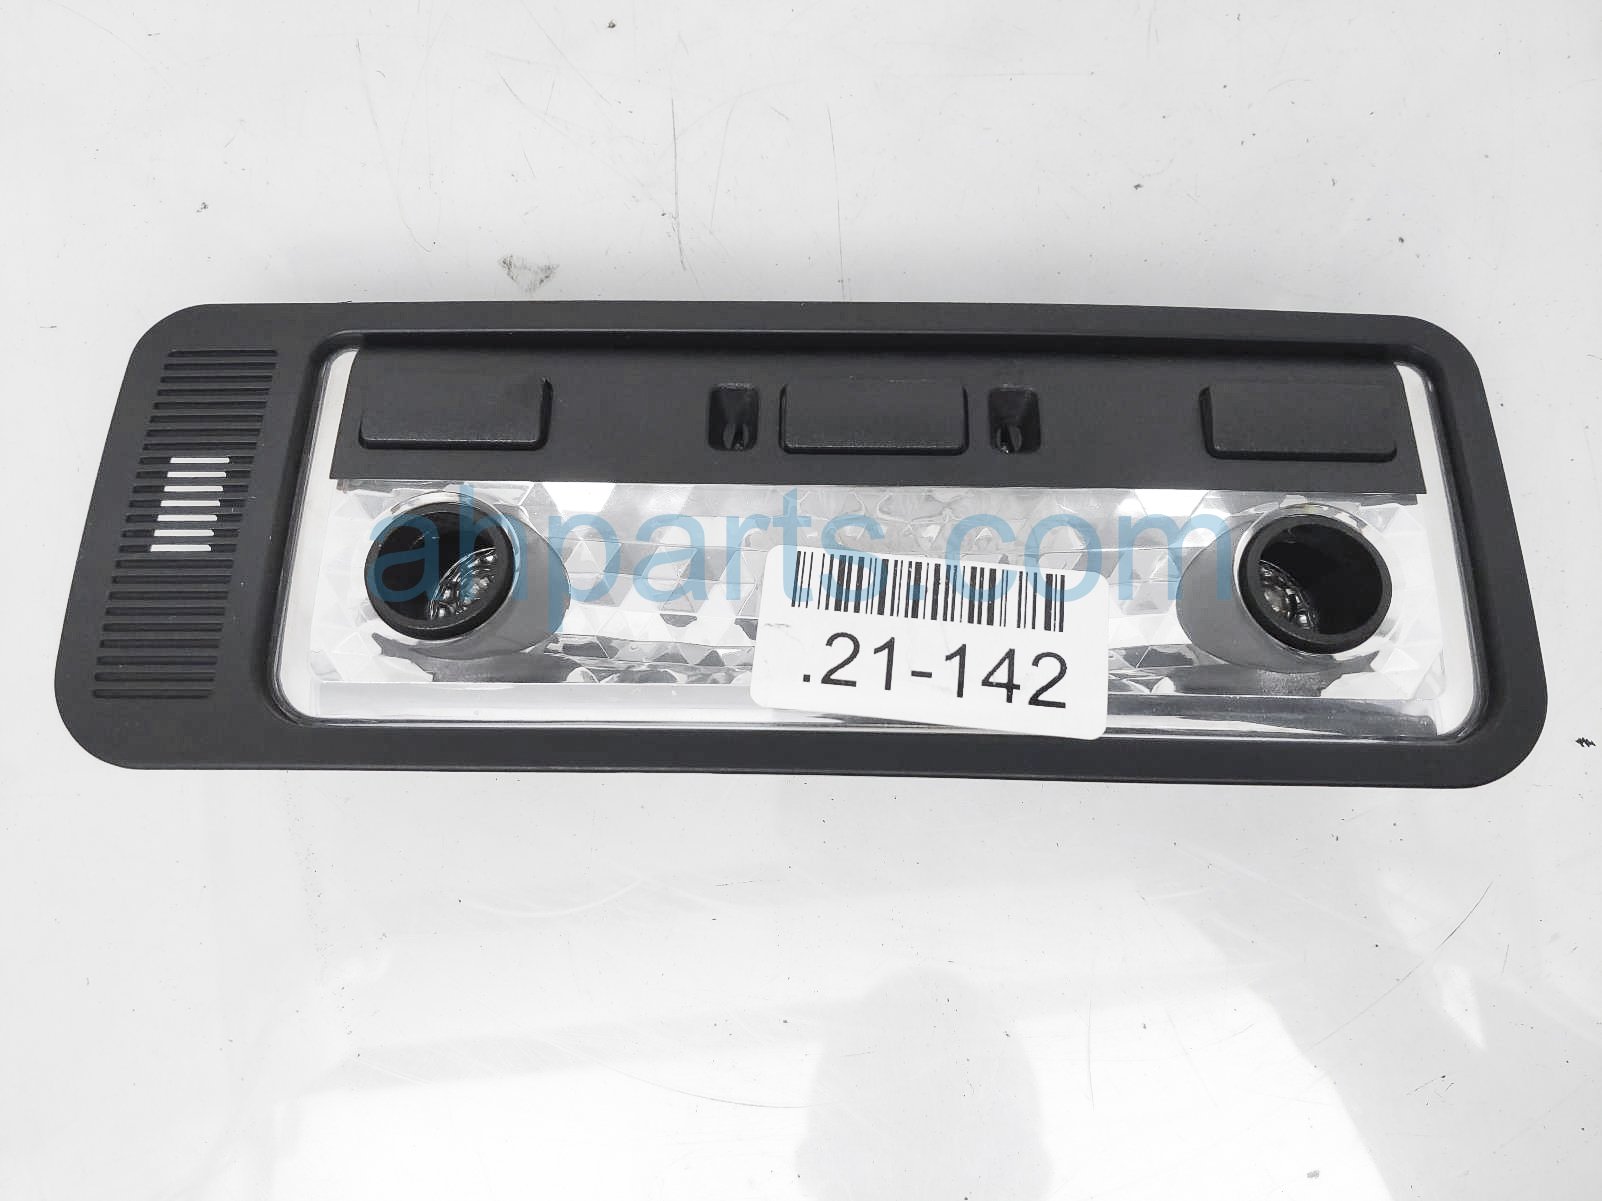 $25 BMW MAP LIGHT / ROOF CONSOLE - BLACK